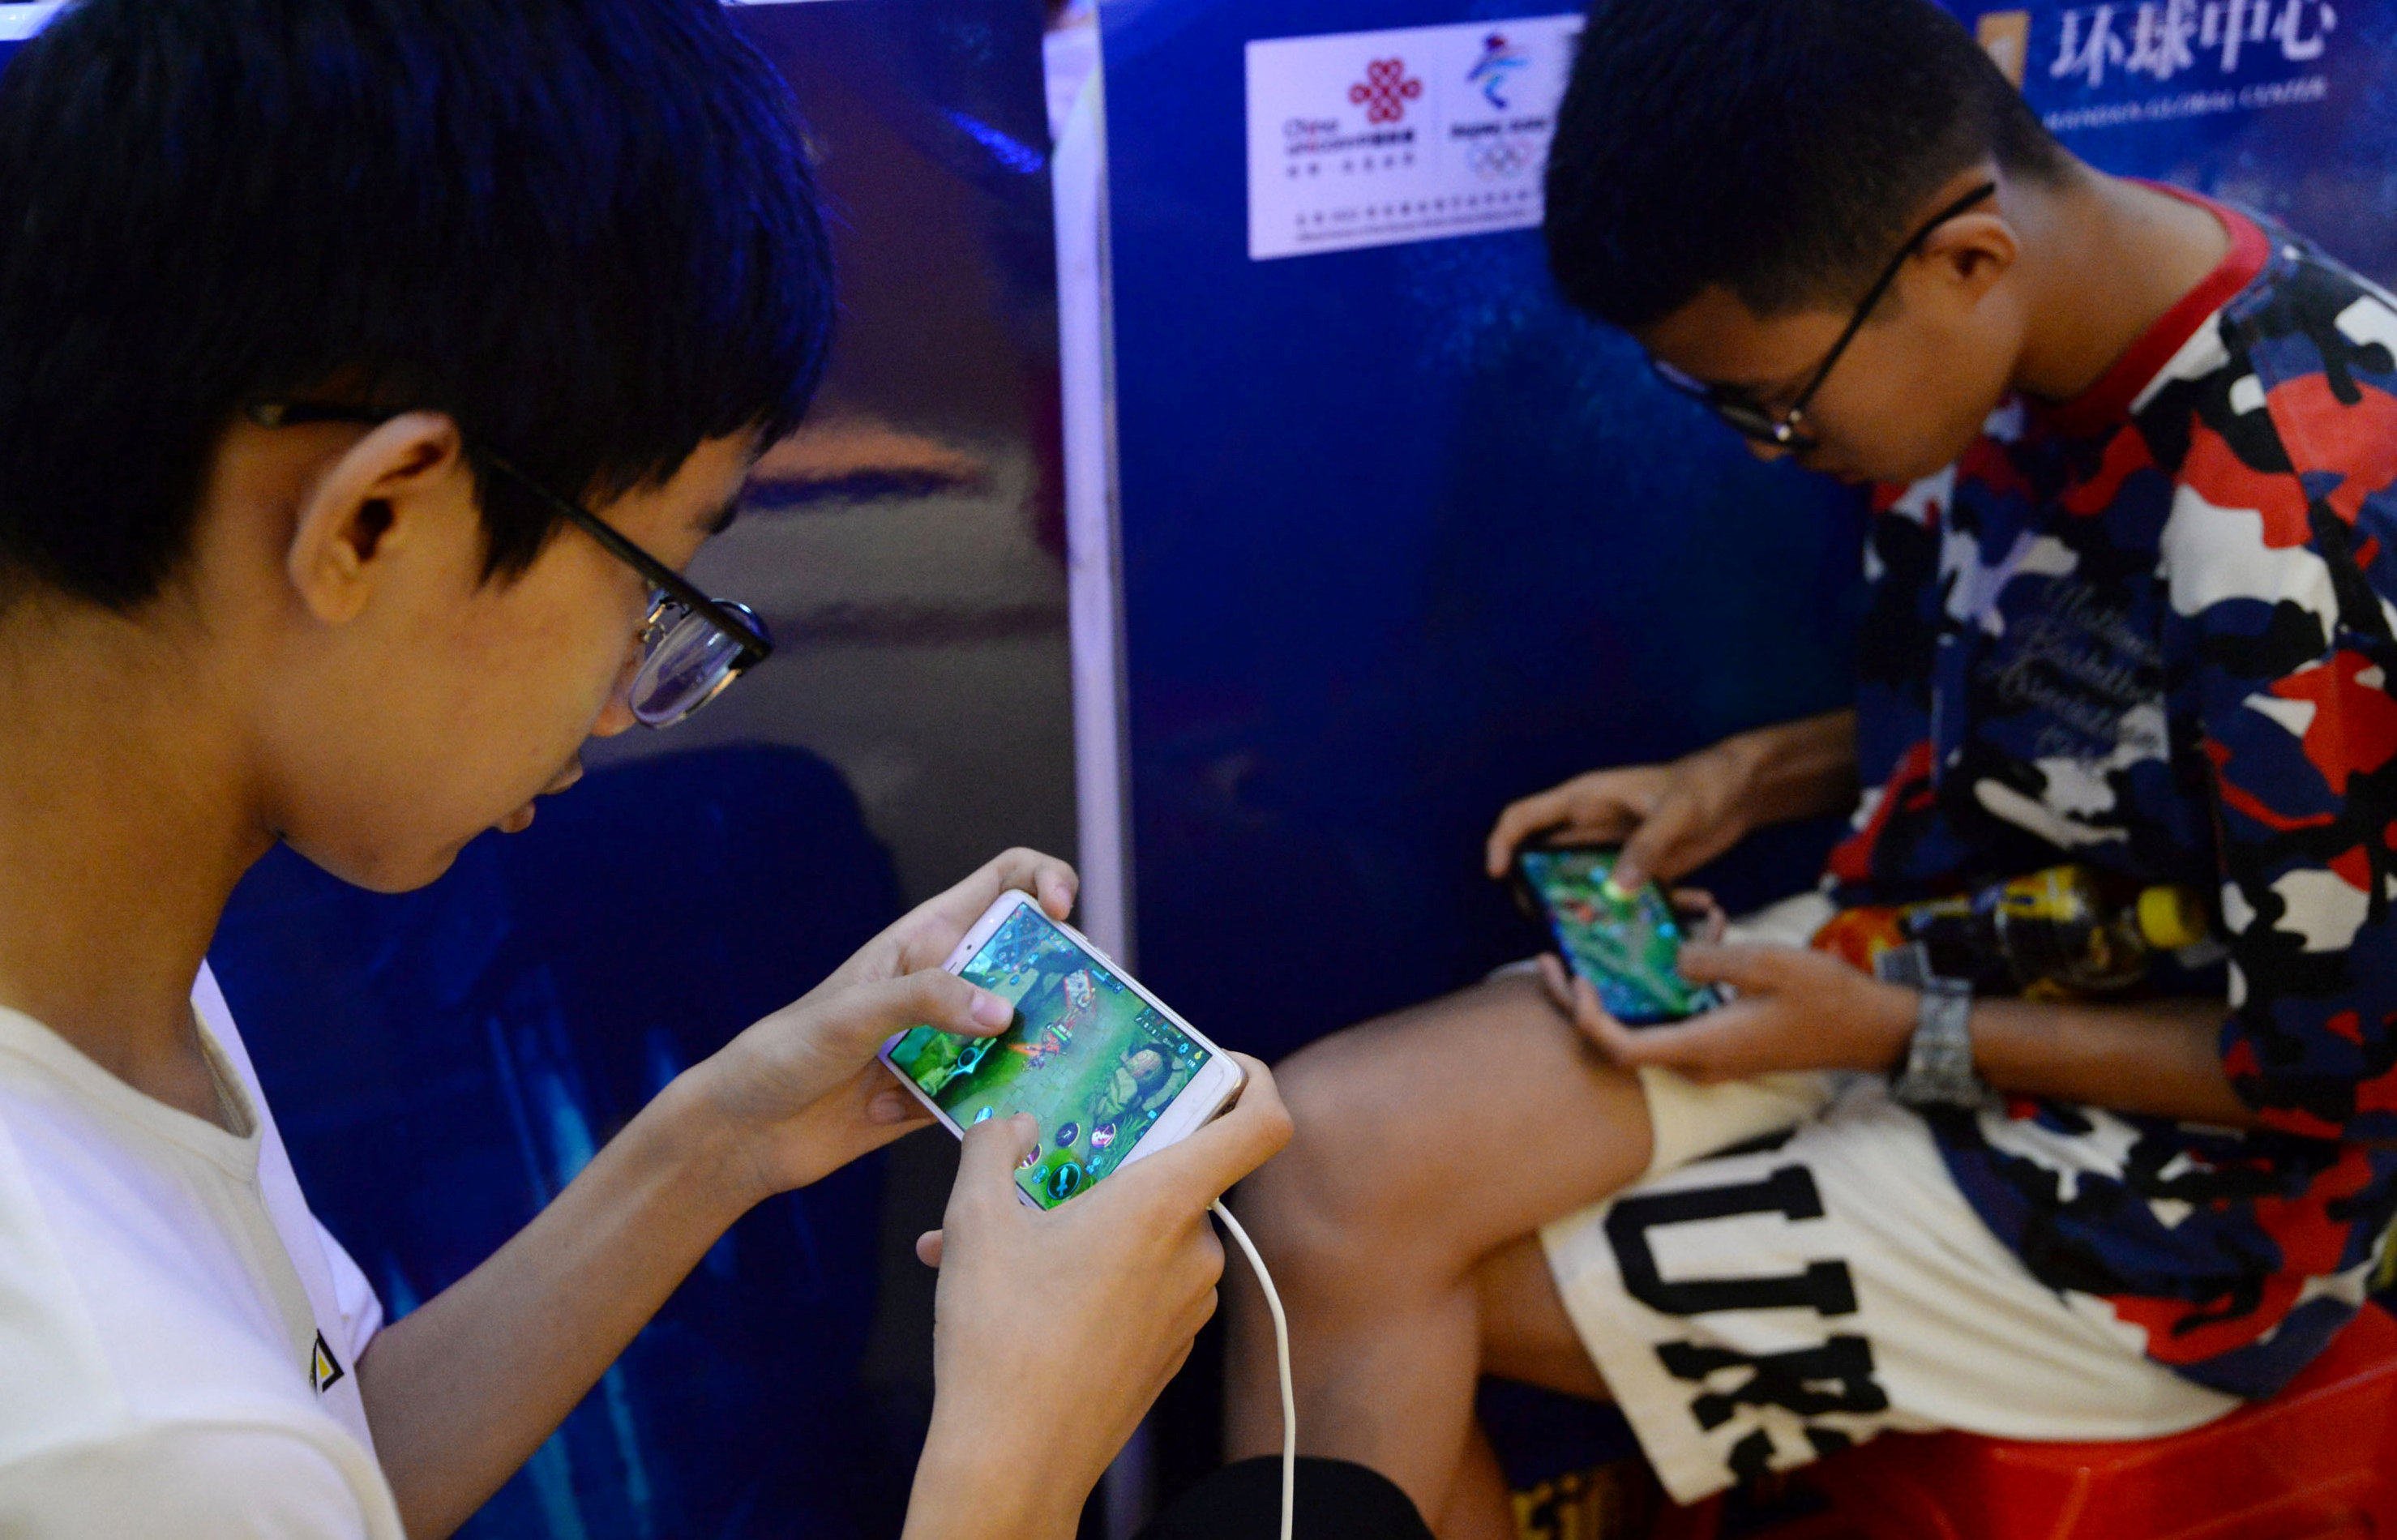 Boys playing Tencent’s Honour of Kings in a shopping mall in Handan, Hebei province. Photo: Reuters